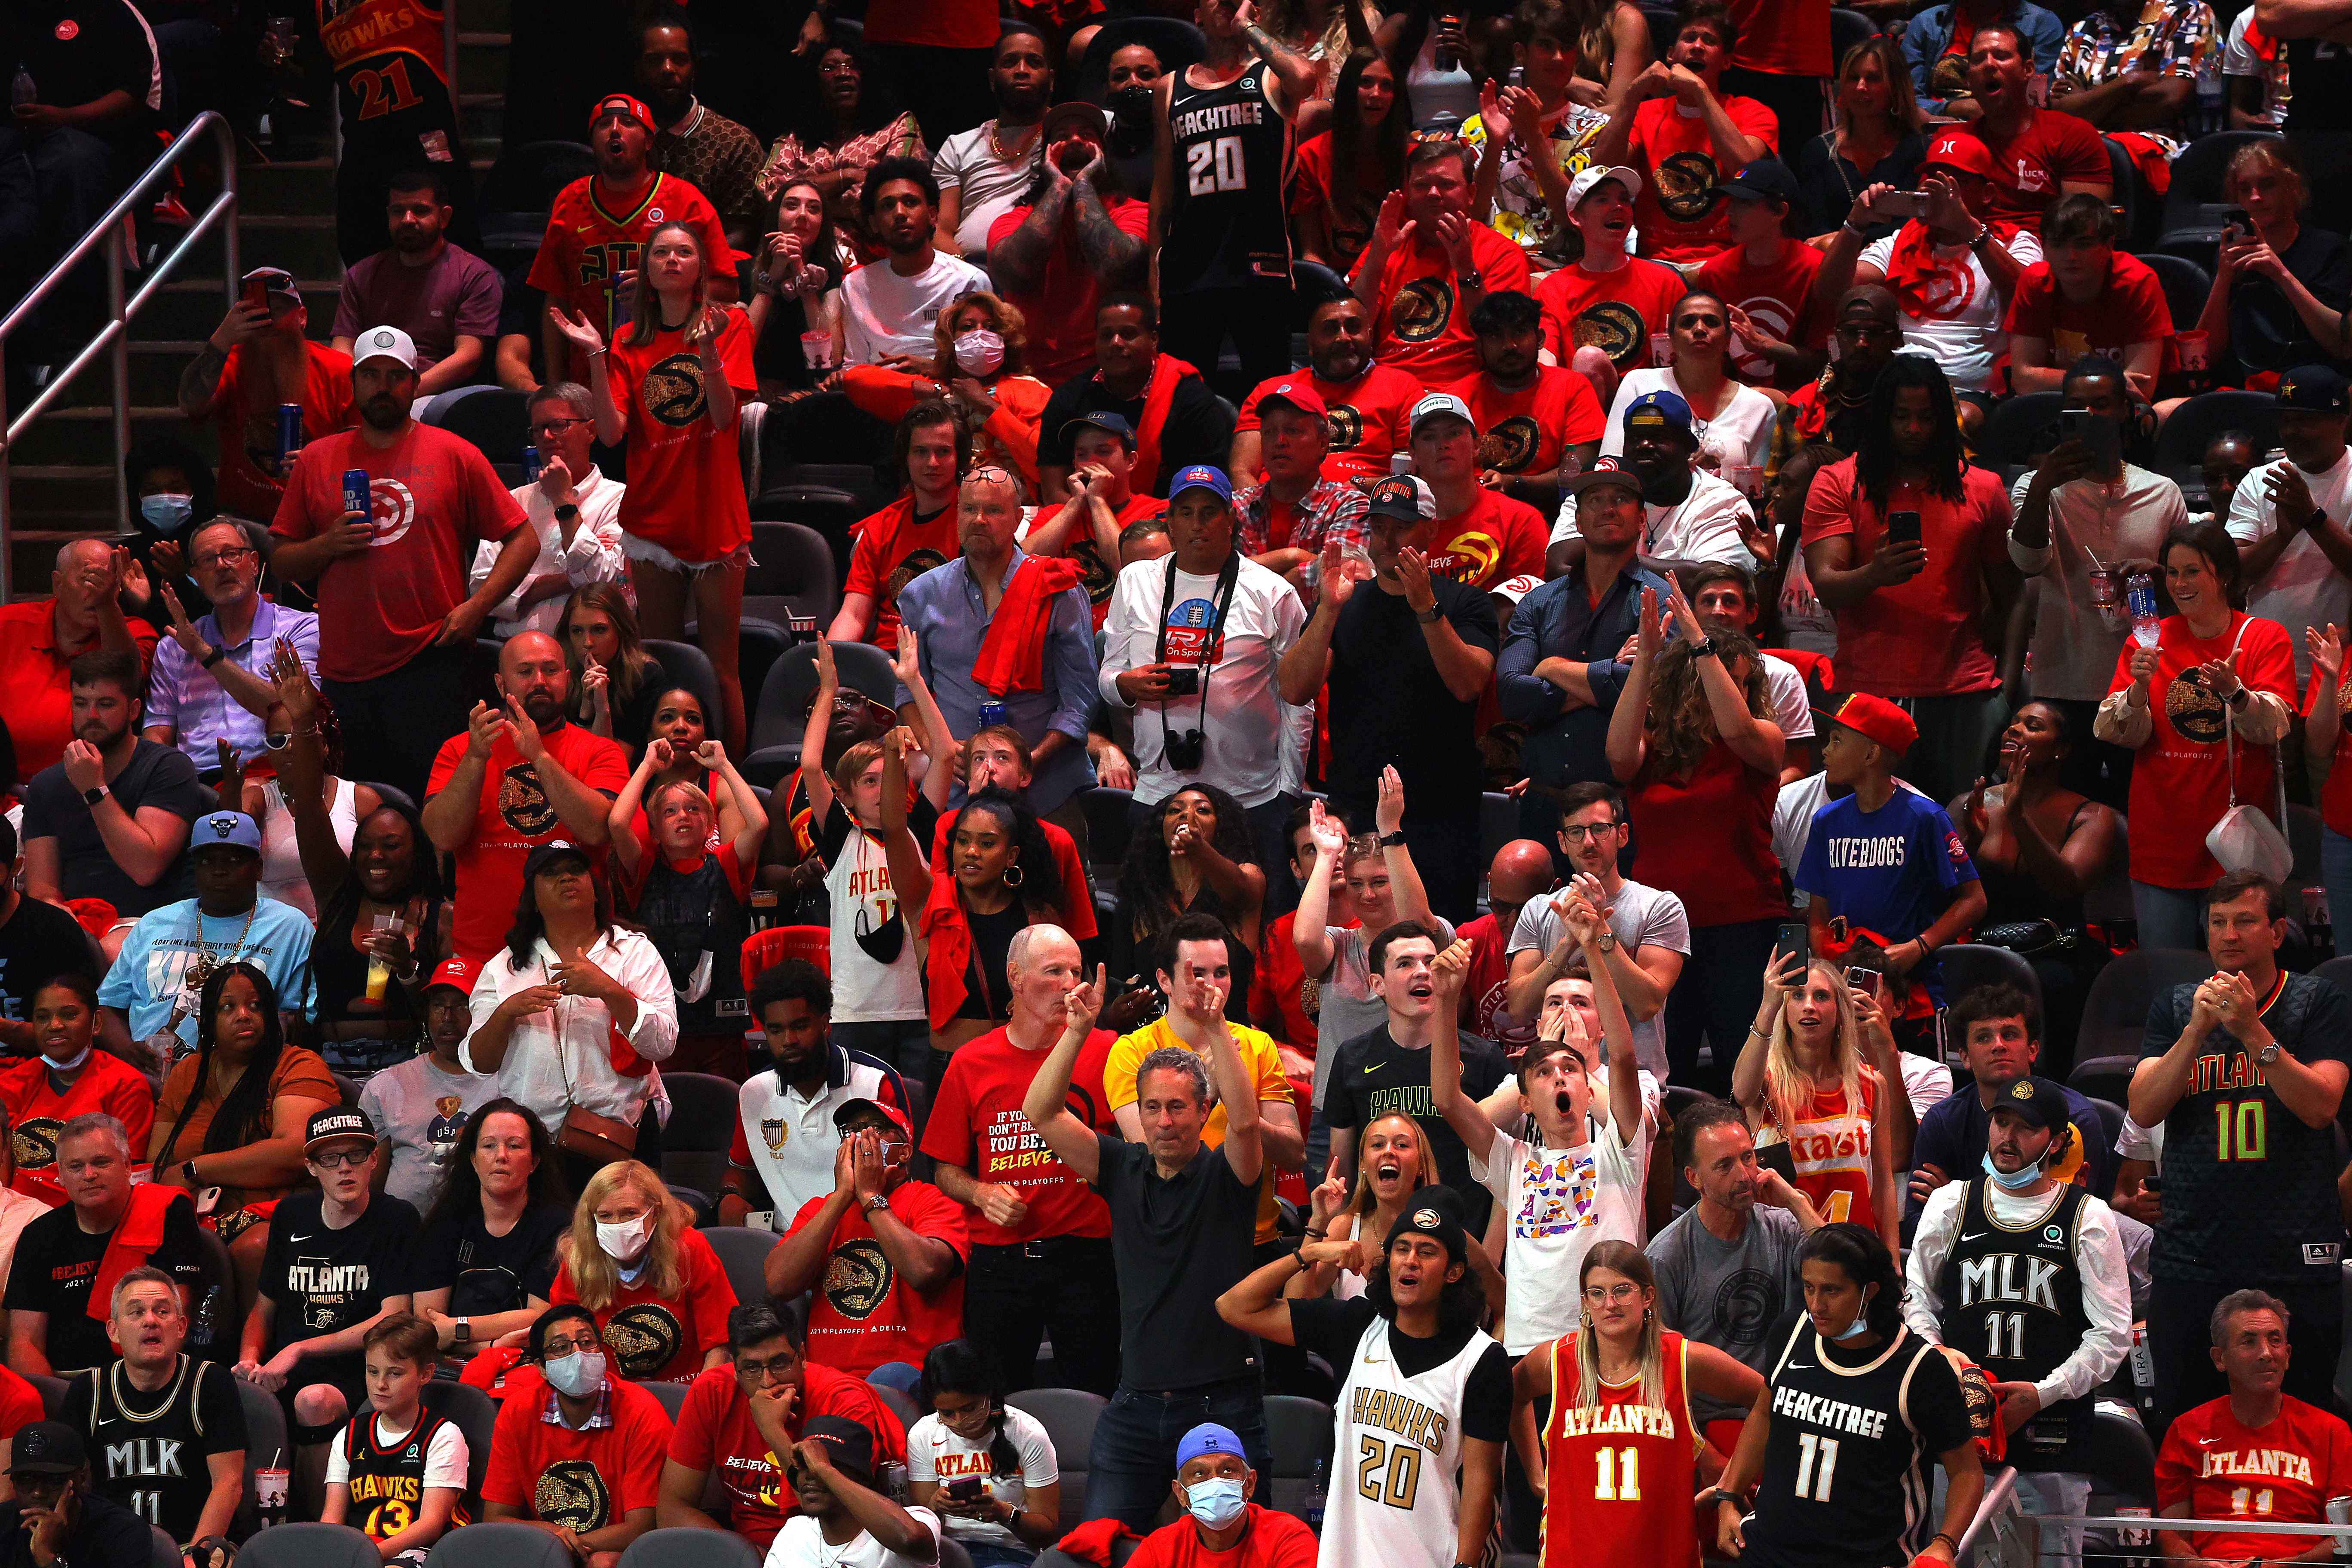 Fans and businesses “Believe” in the Atlanta Hawks playoff run